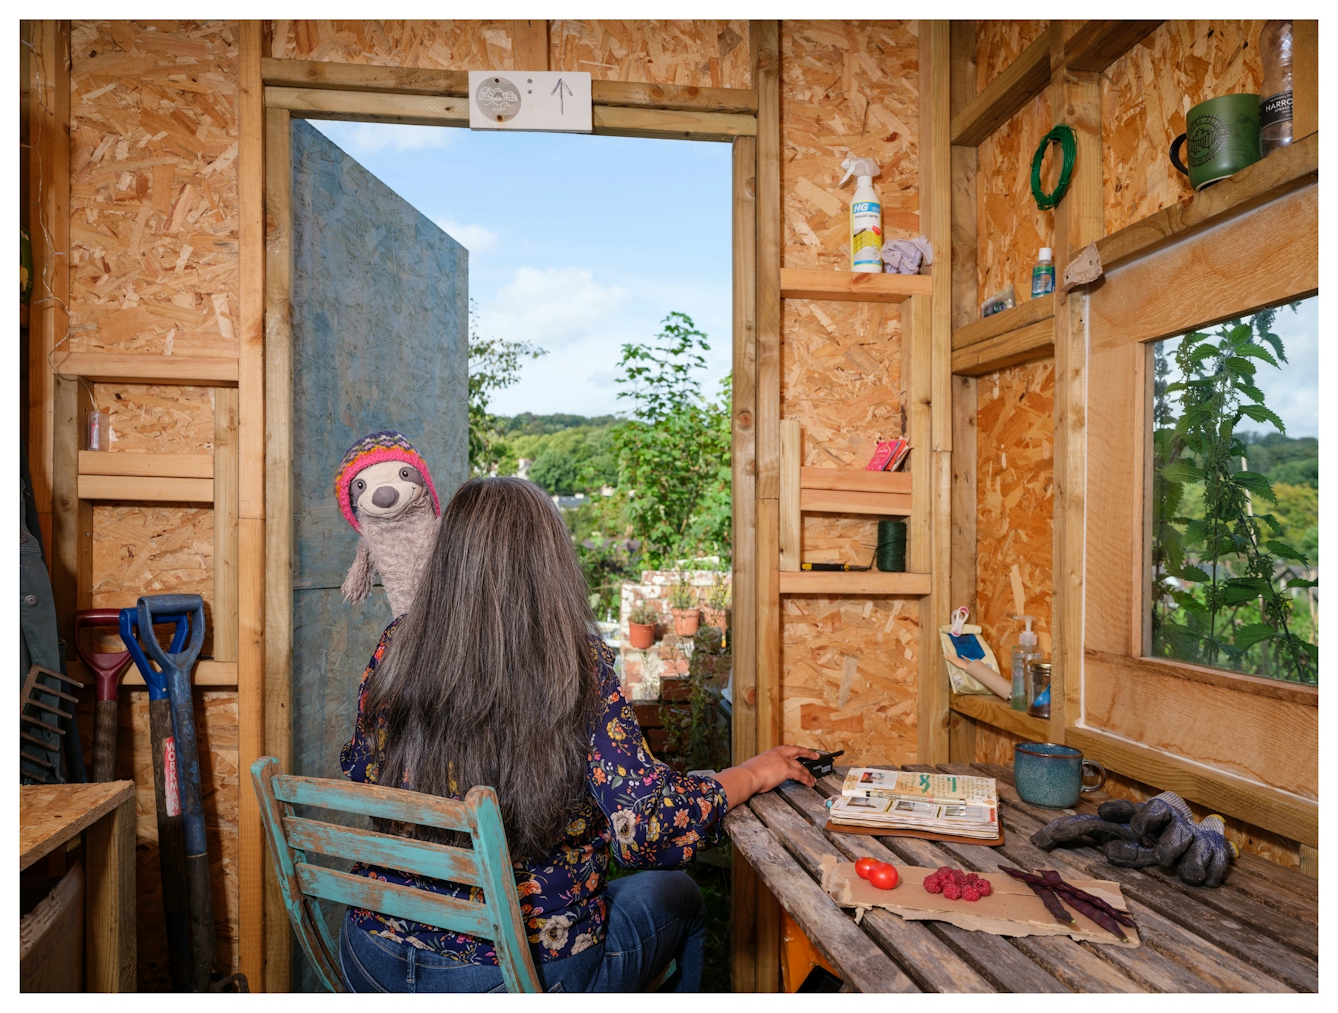 Assisted Self-Portrait of a woman with long hair sat on a wooden chair in an allotment shed with her back to the camera. Peeping over her left shoulder is a grey soft toy sloth, wearing a pink and blue woolly hat, smiling to camera. On the table is an open journal, tomatoes, raspberries and seed pods. In her right hand is the remote trigger that she used to capture the image.